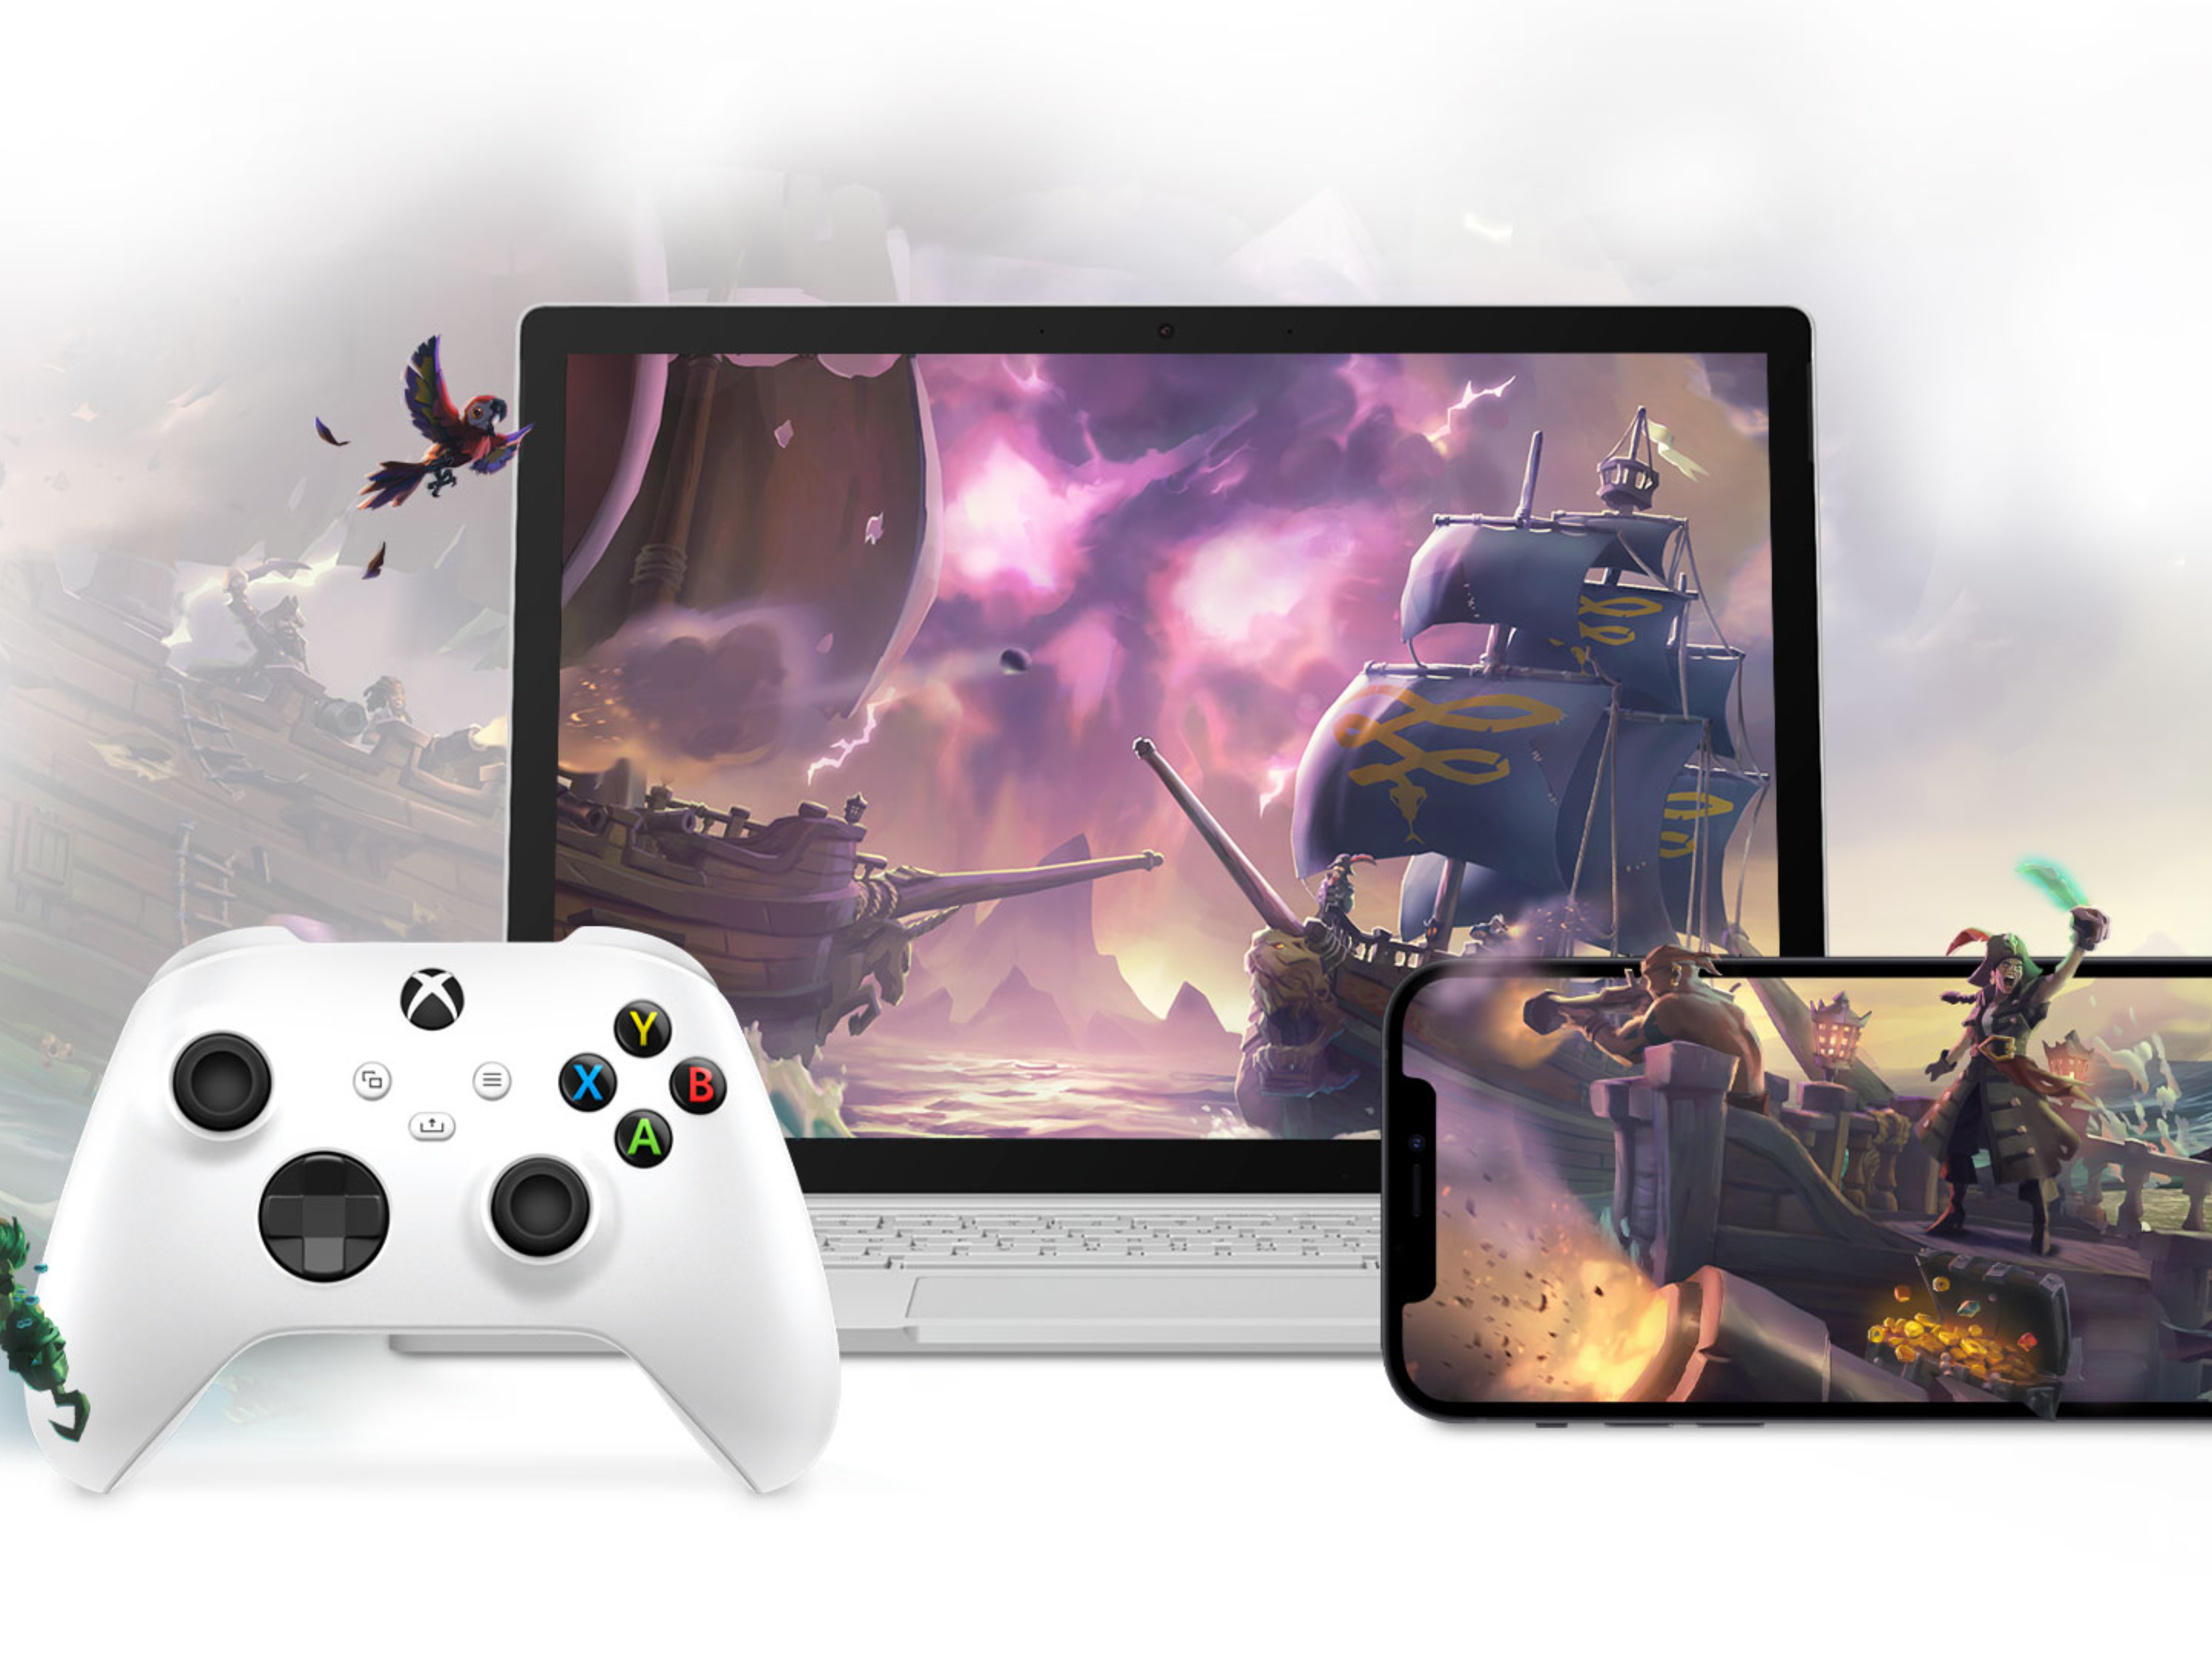 Microsoft is launching Xbox.com/play for Windows 10, tablets and iOS devices